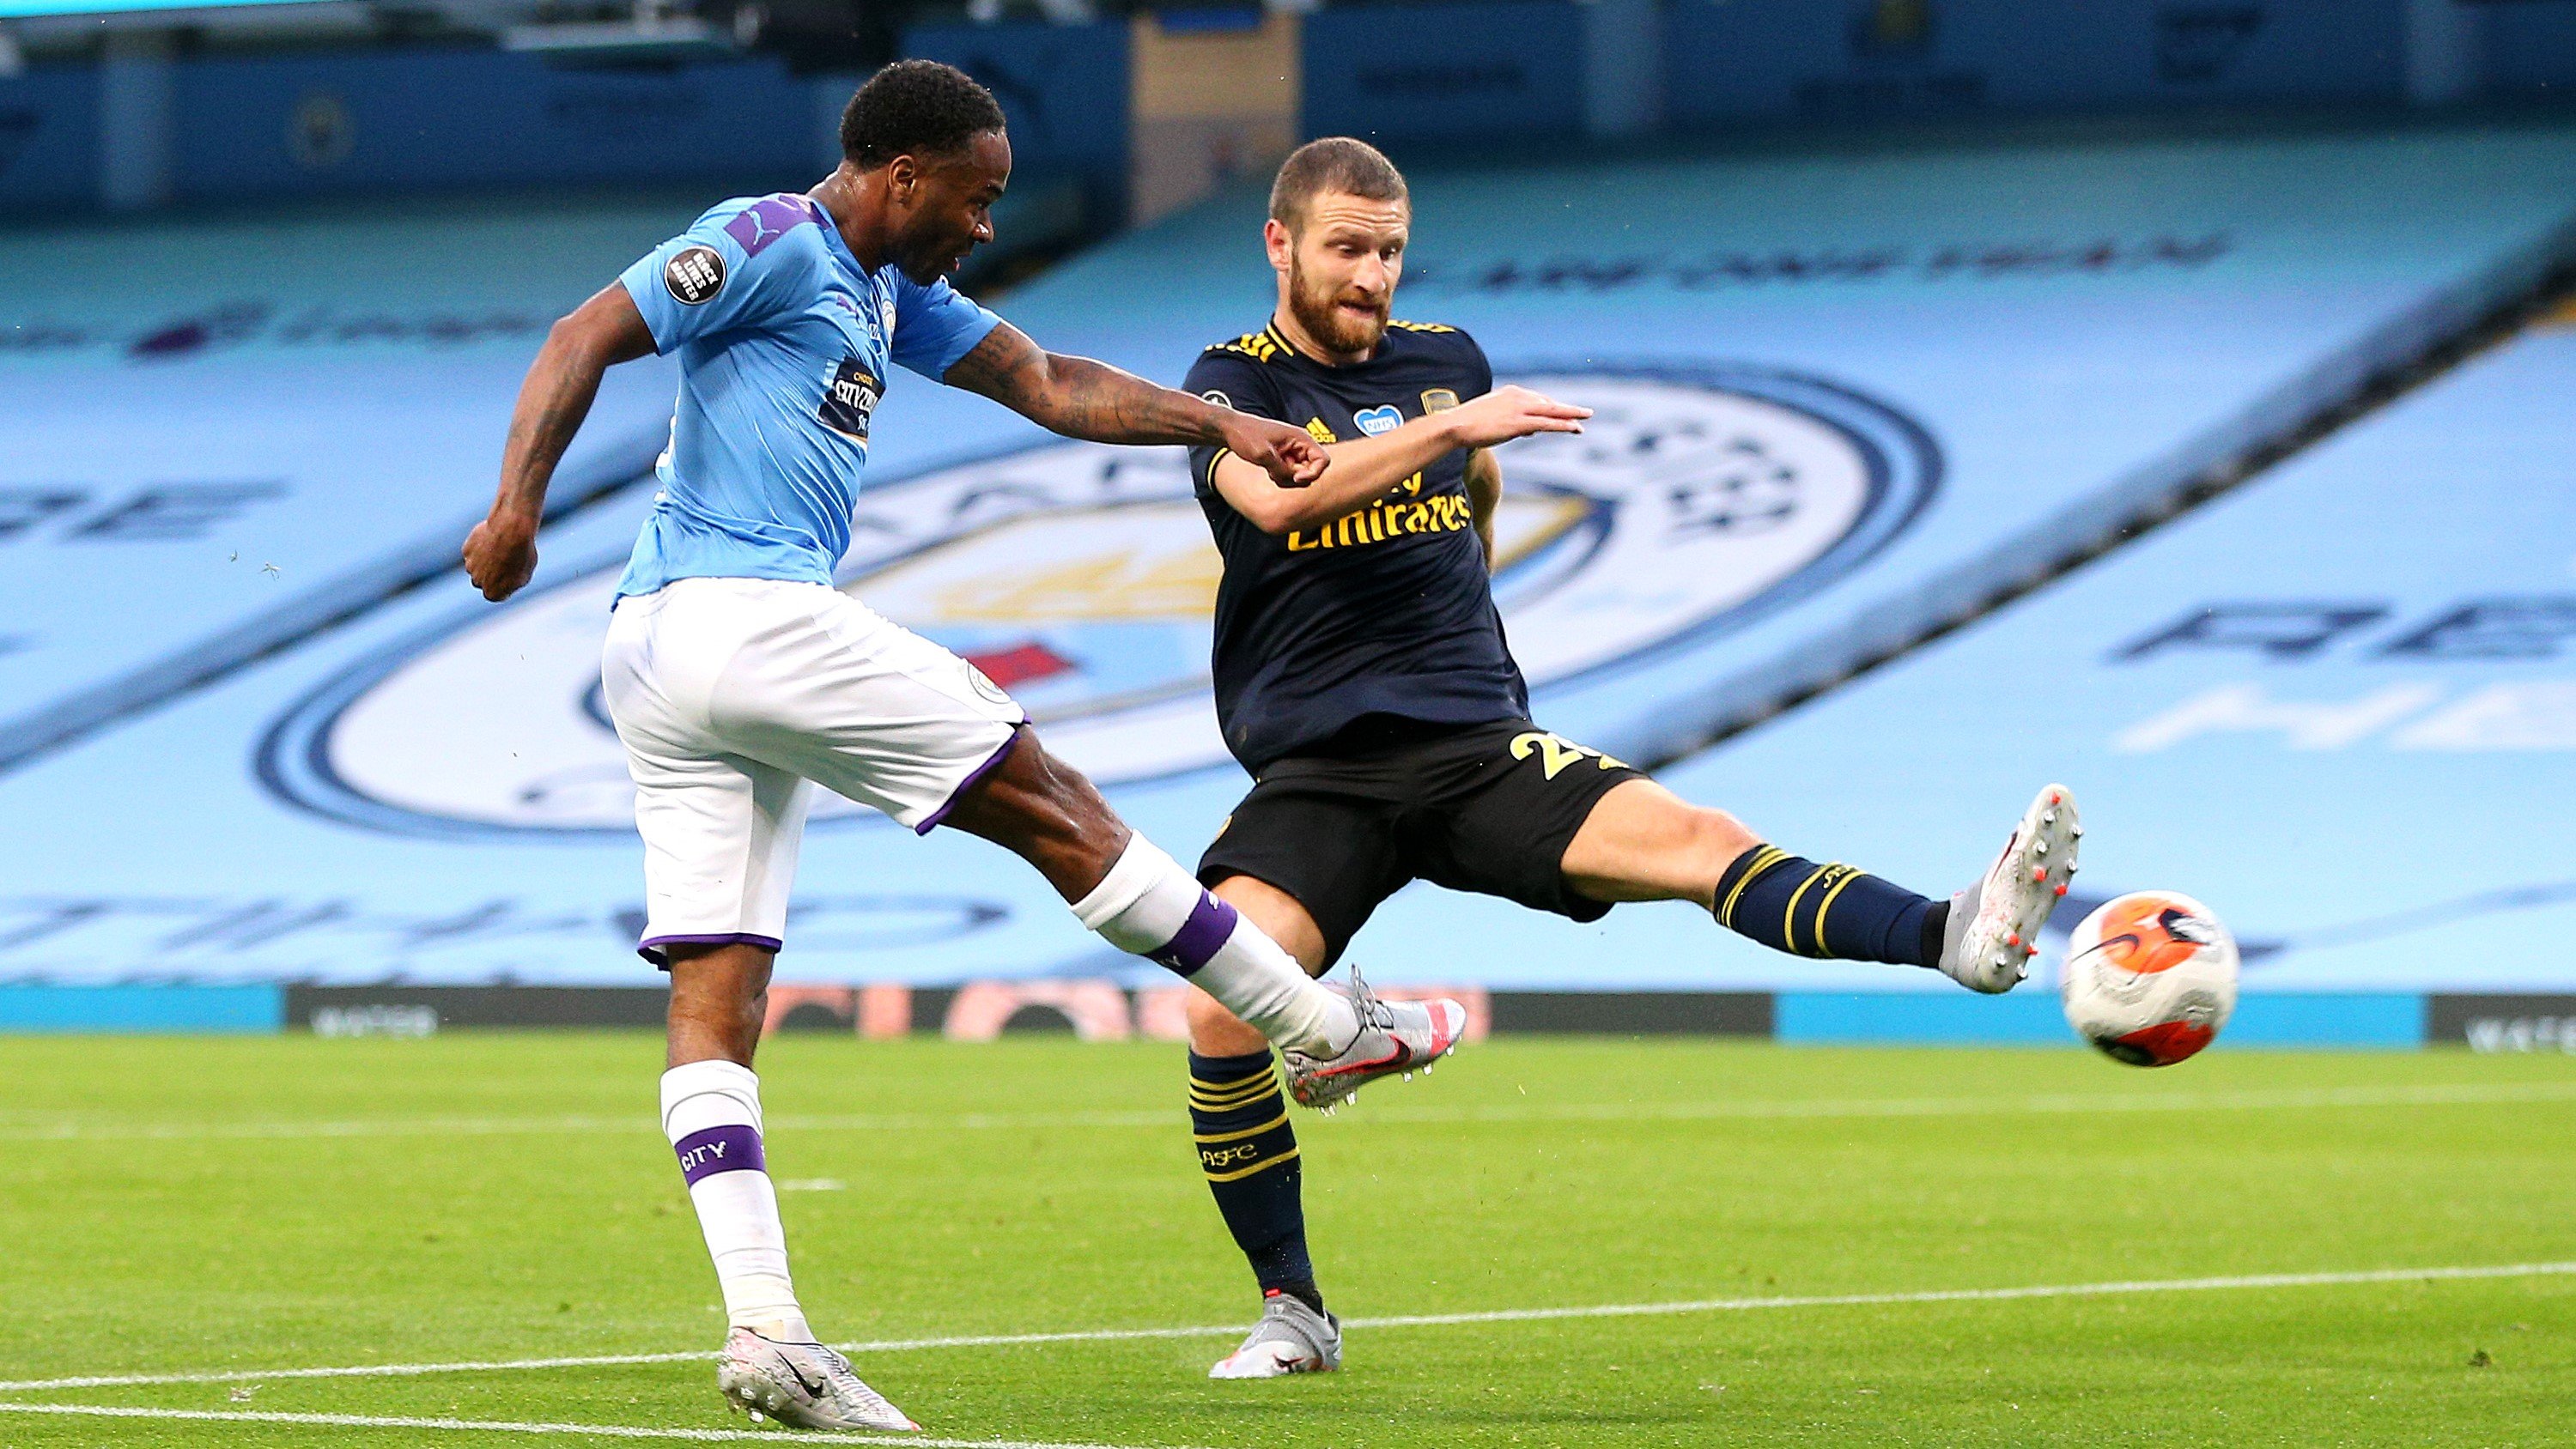 Man City vs Arsenal Round-up and Highlights: EPL match on 17.06.2020